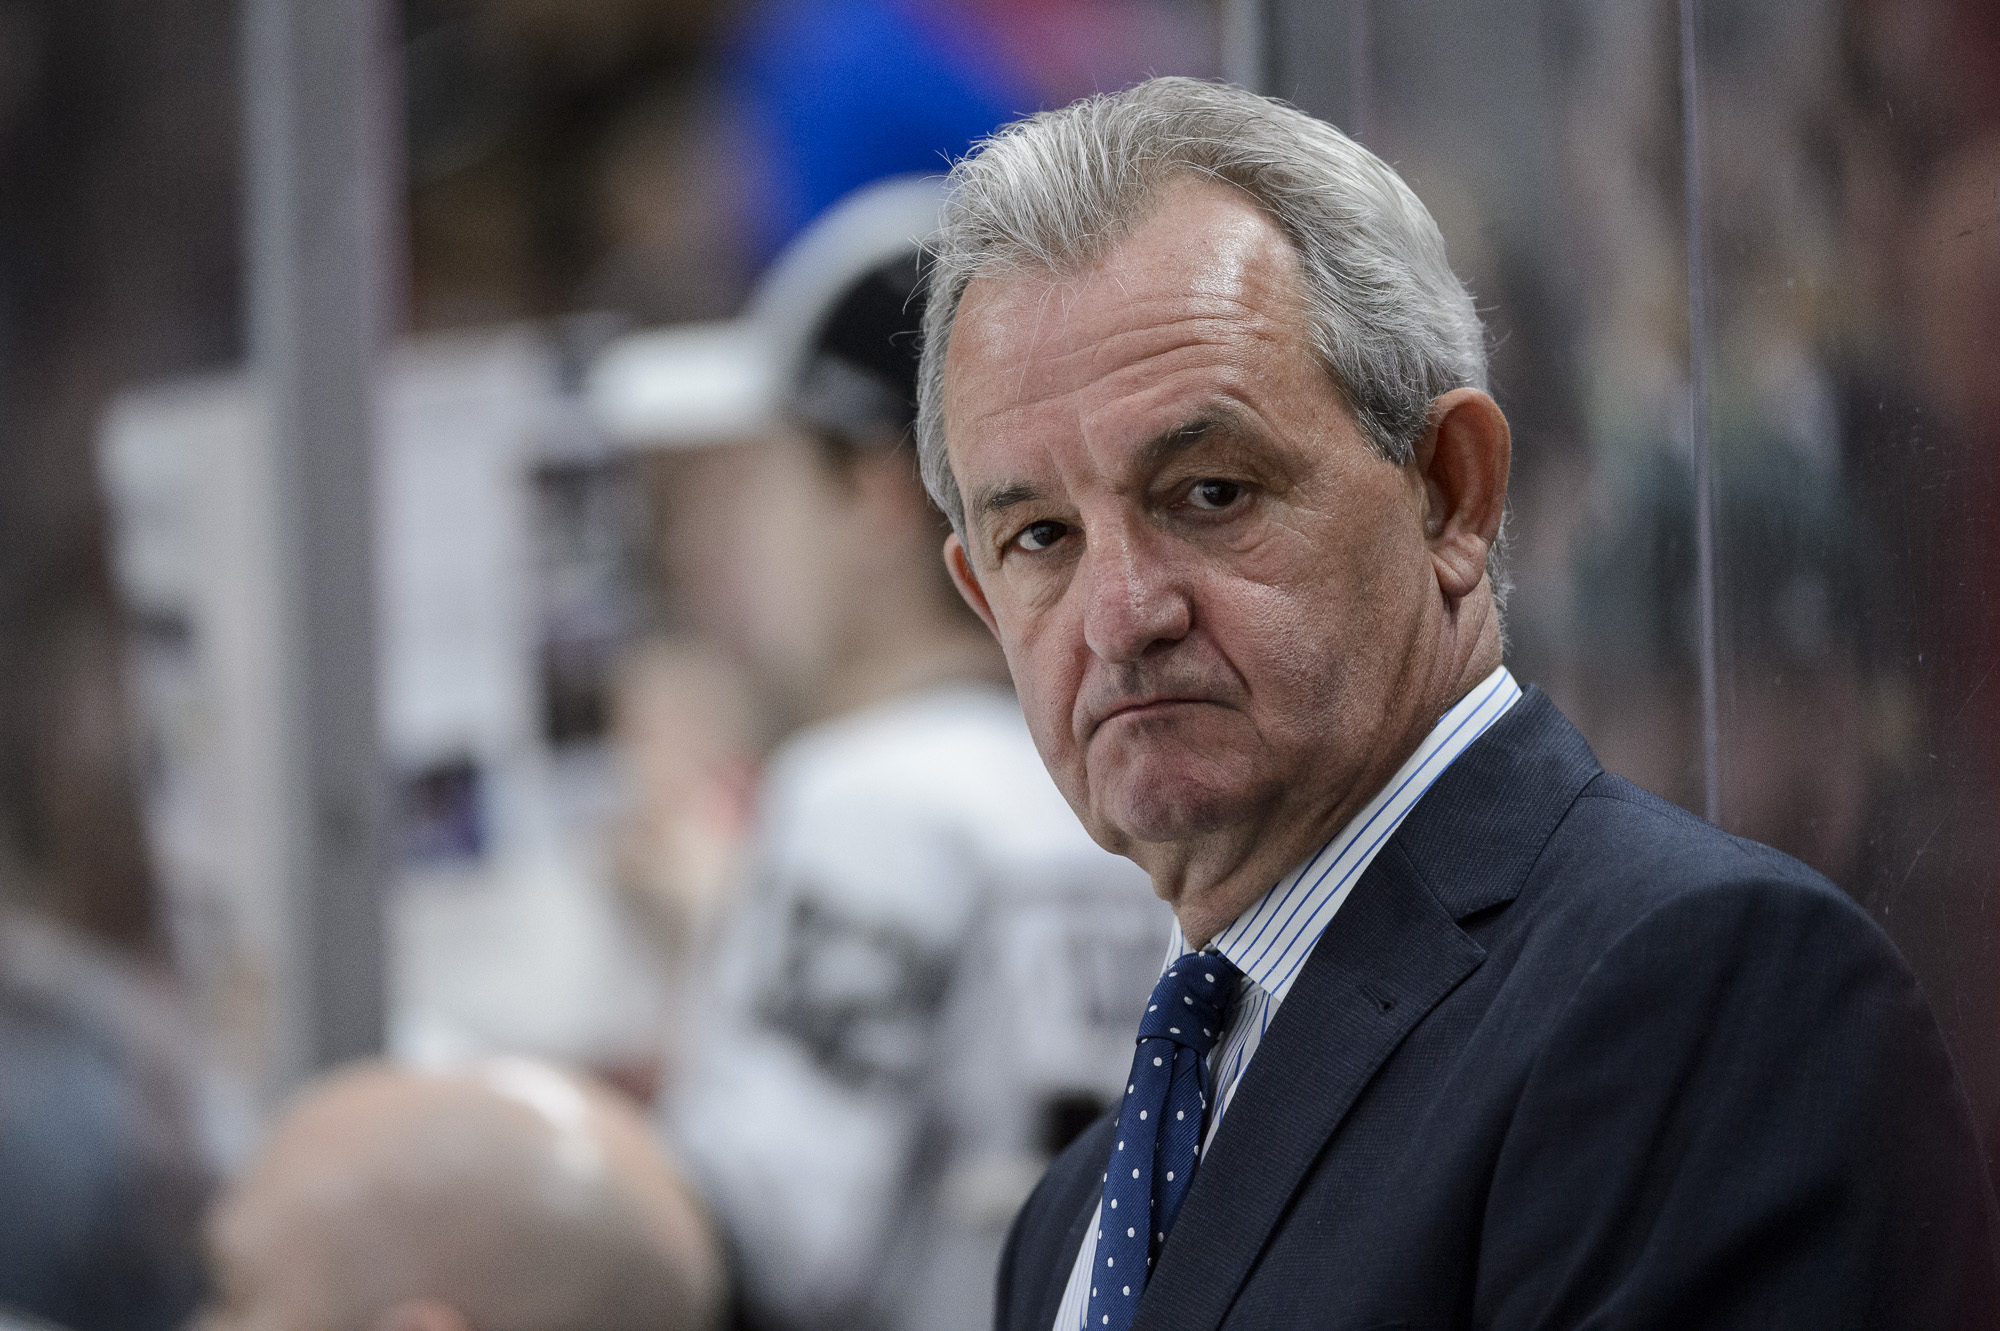 Flames stay close to the Darryl Sutter script in his successful return to  the bench - The Athletic